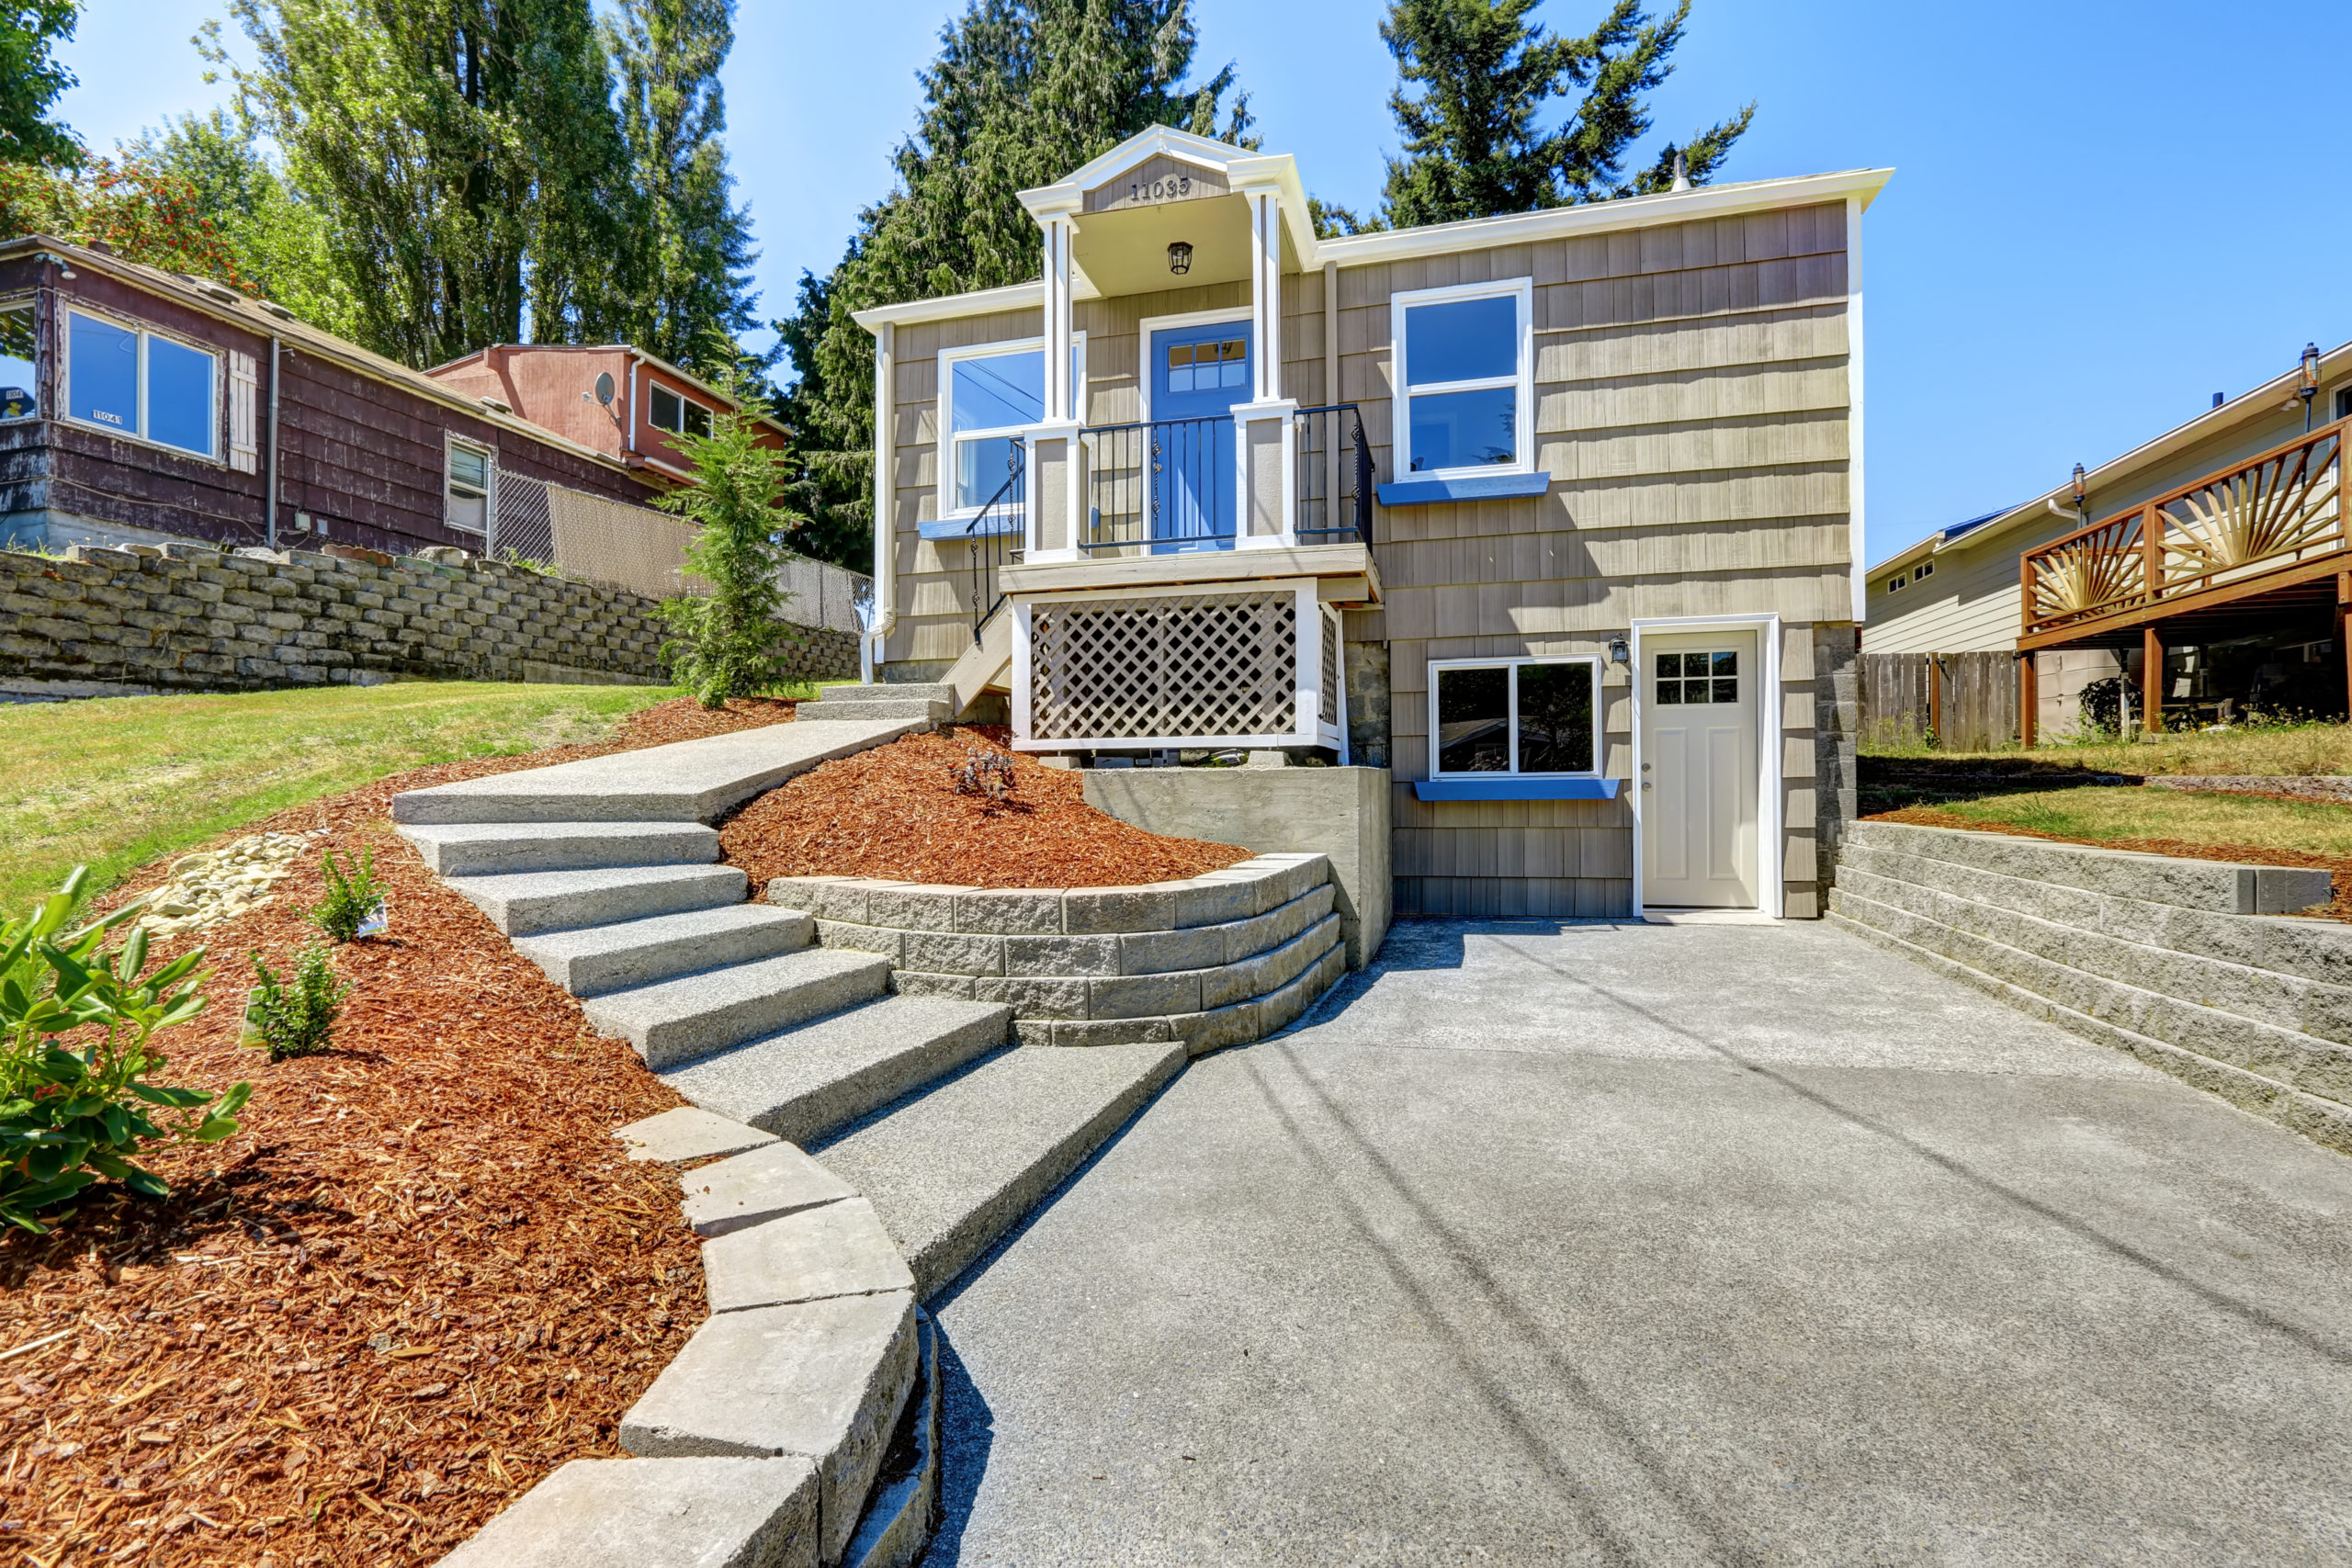 This is an image of a residential property with a concrete driveway and stairs.